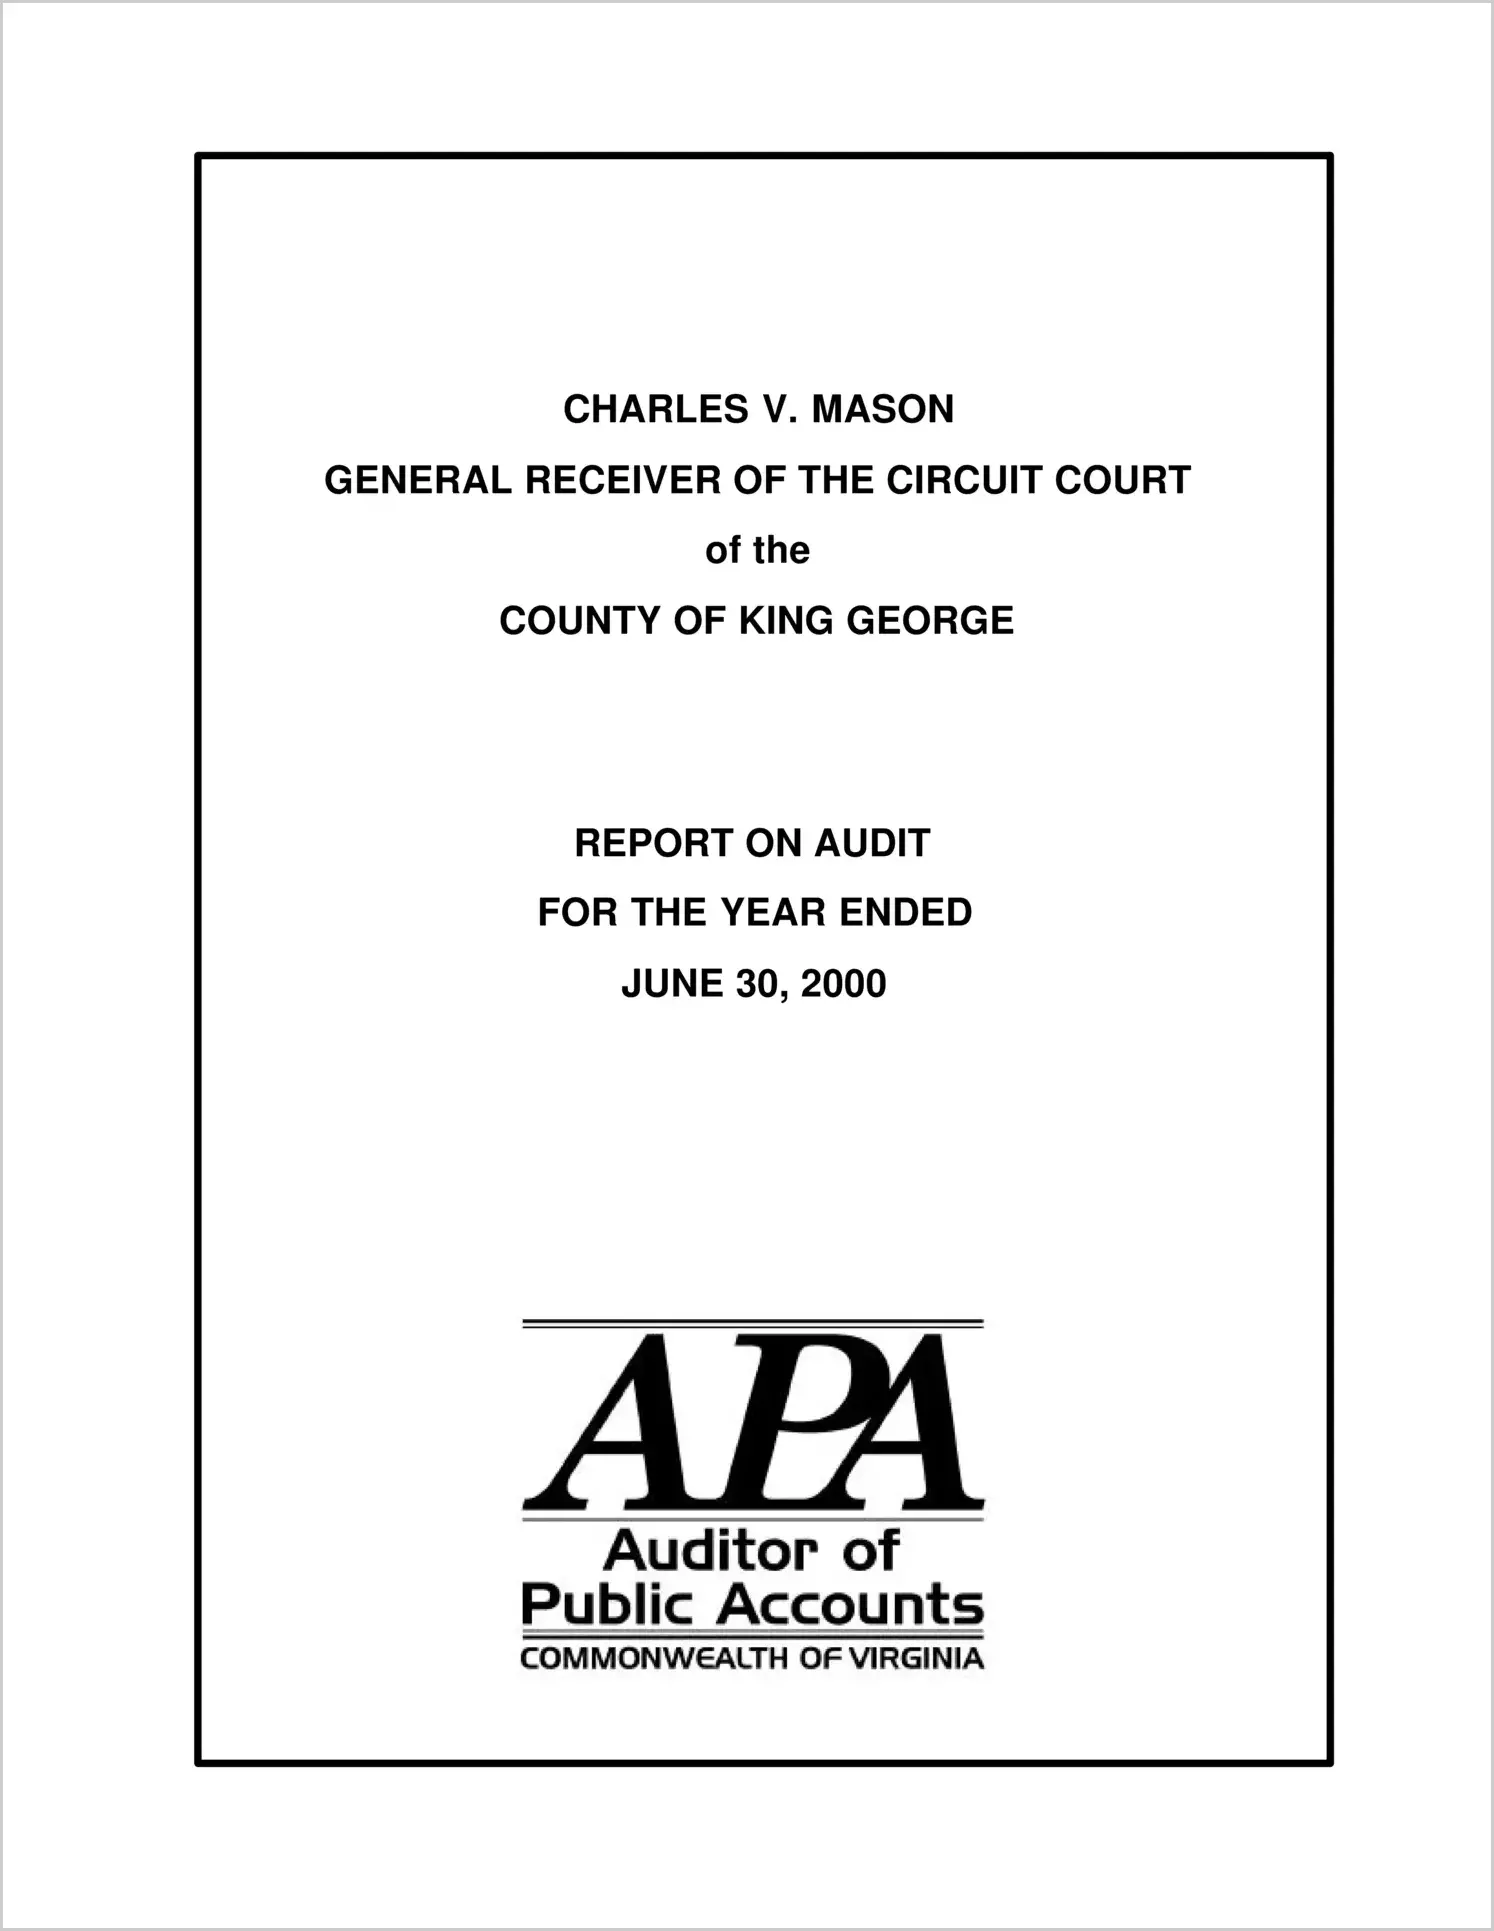 General Receiver of the Circuit Court of the County of King George for the year ended June 30, 2000